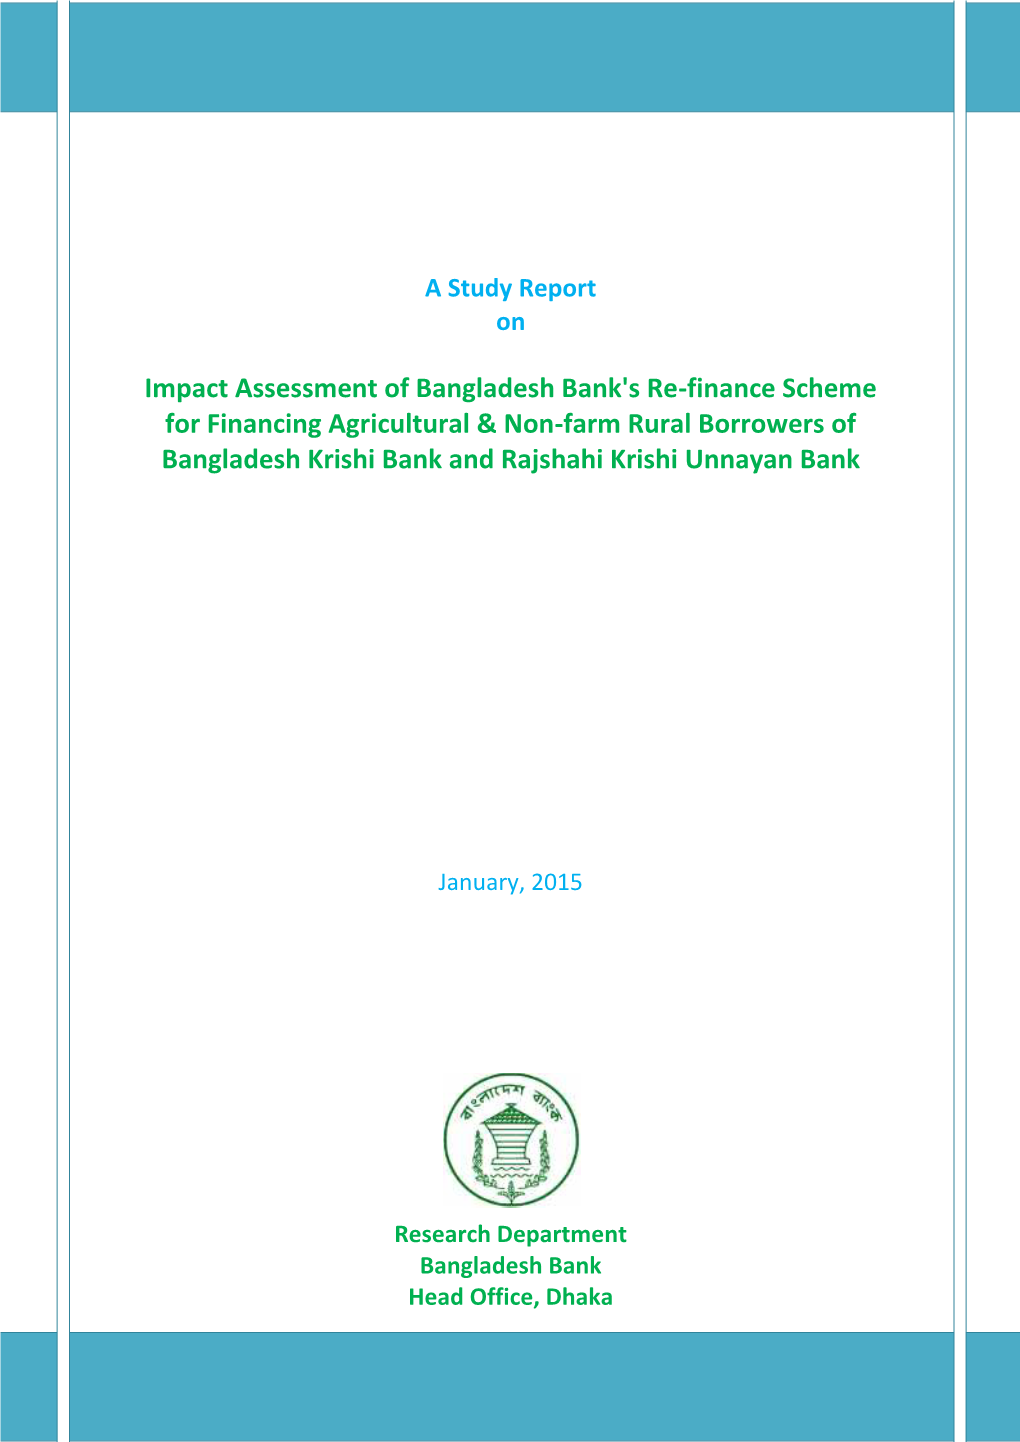 Impact Assessment of Banglade for Financing Agricultural & N